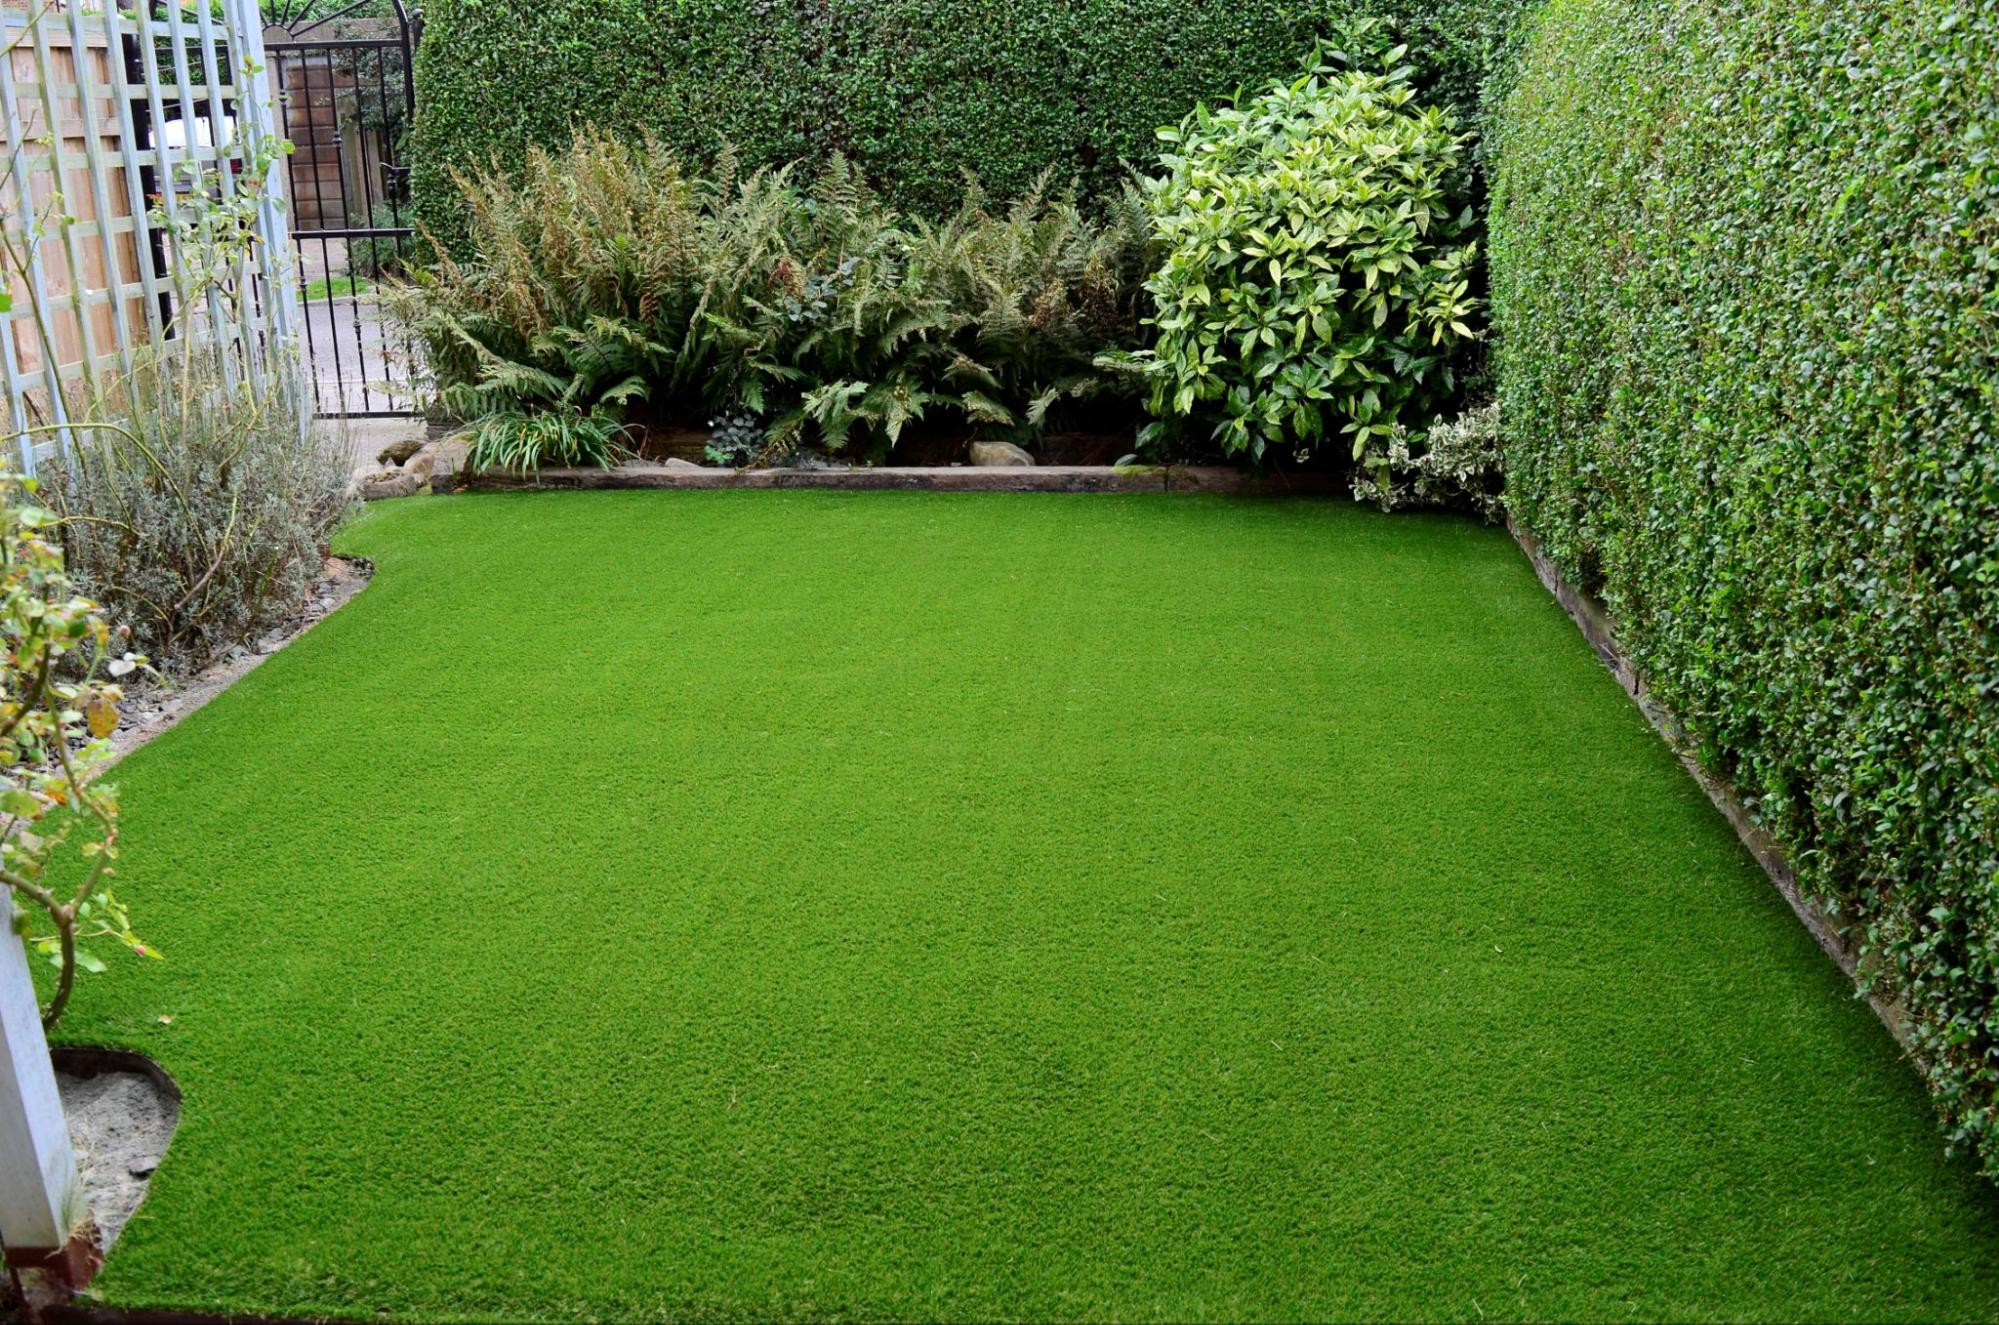 5 Creative Ways to Use Artificial Grass in Your Landscape Design